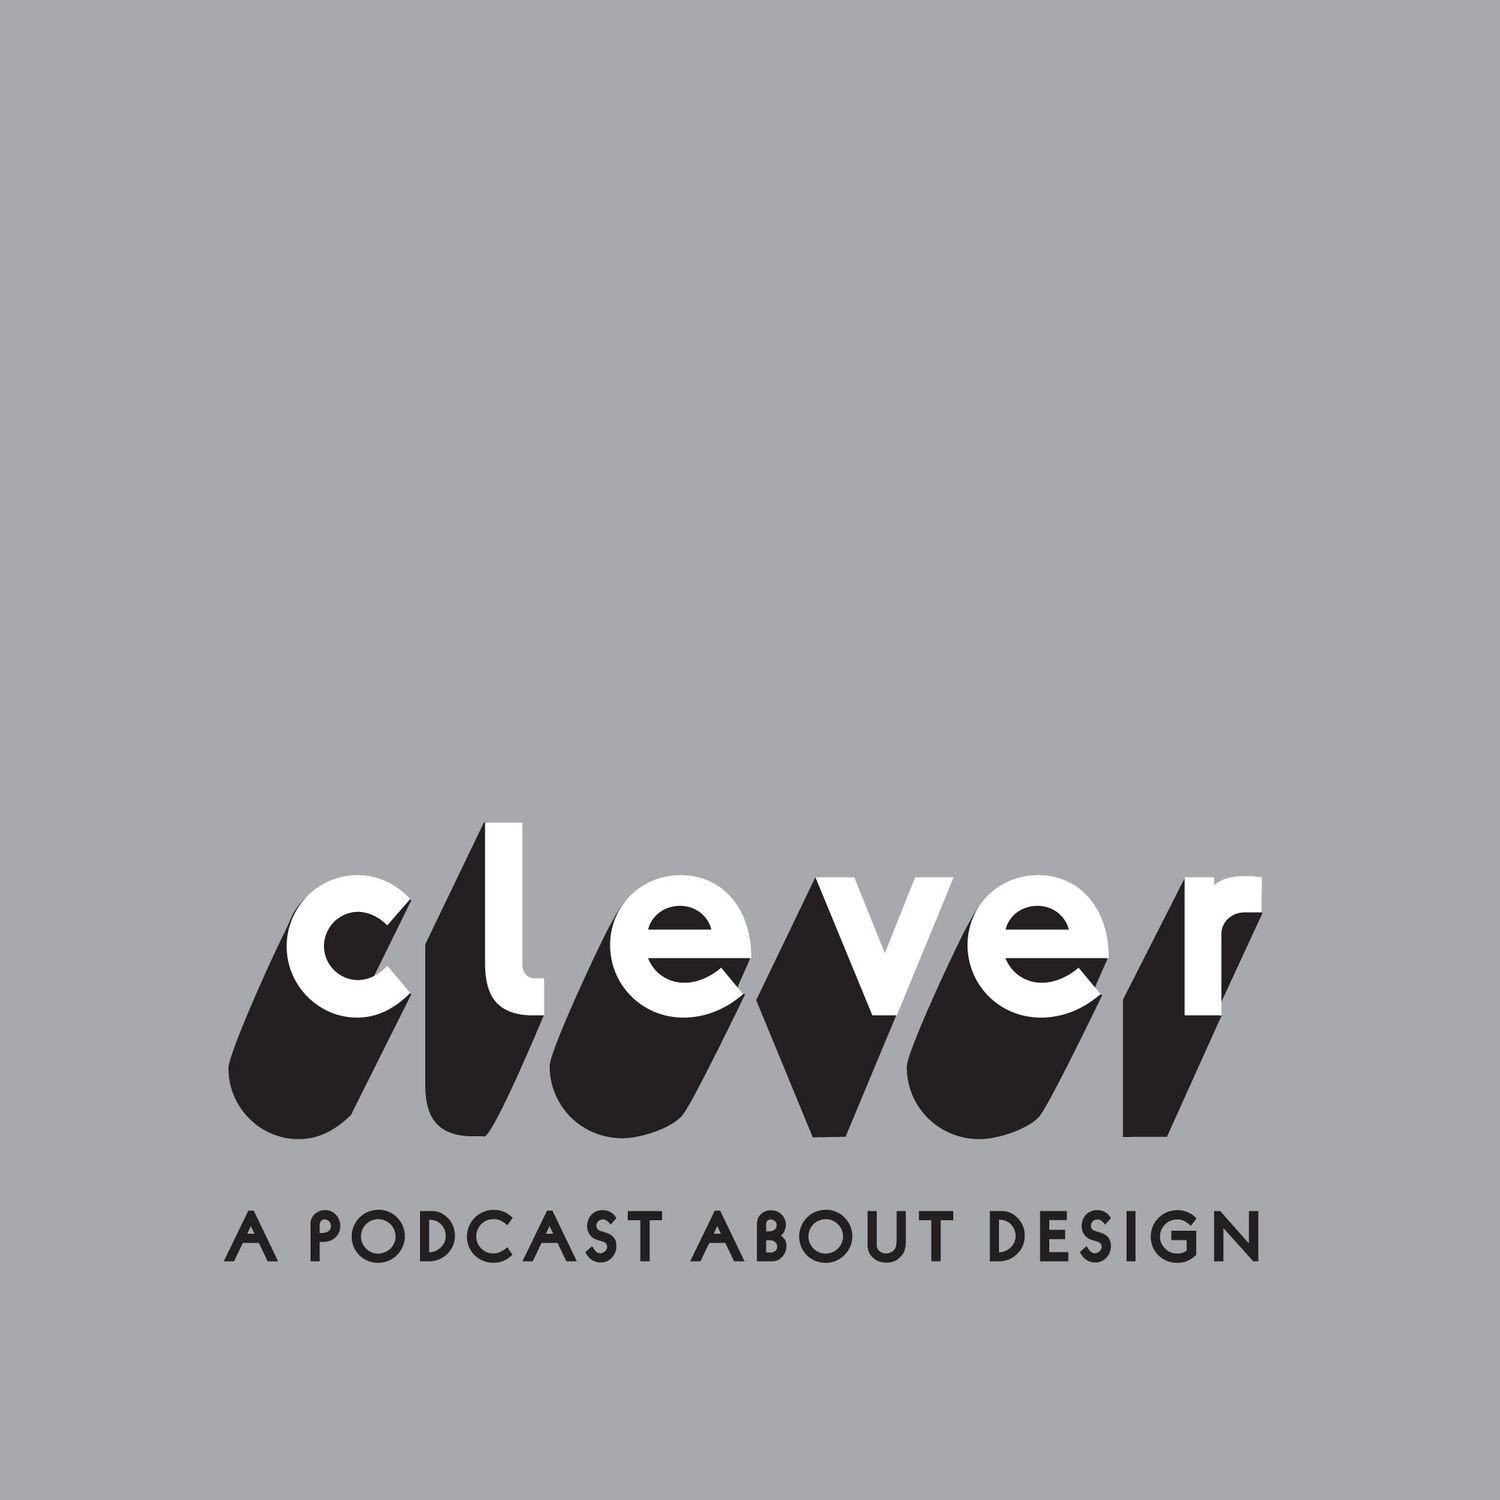 clever-icon-itunes-2000x2000.jpg